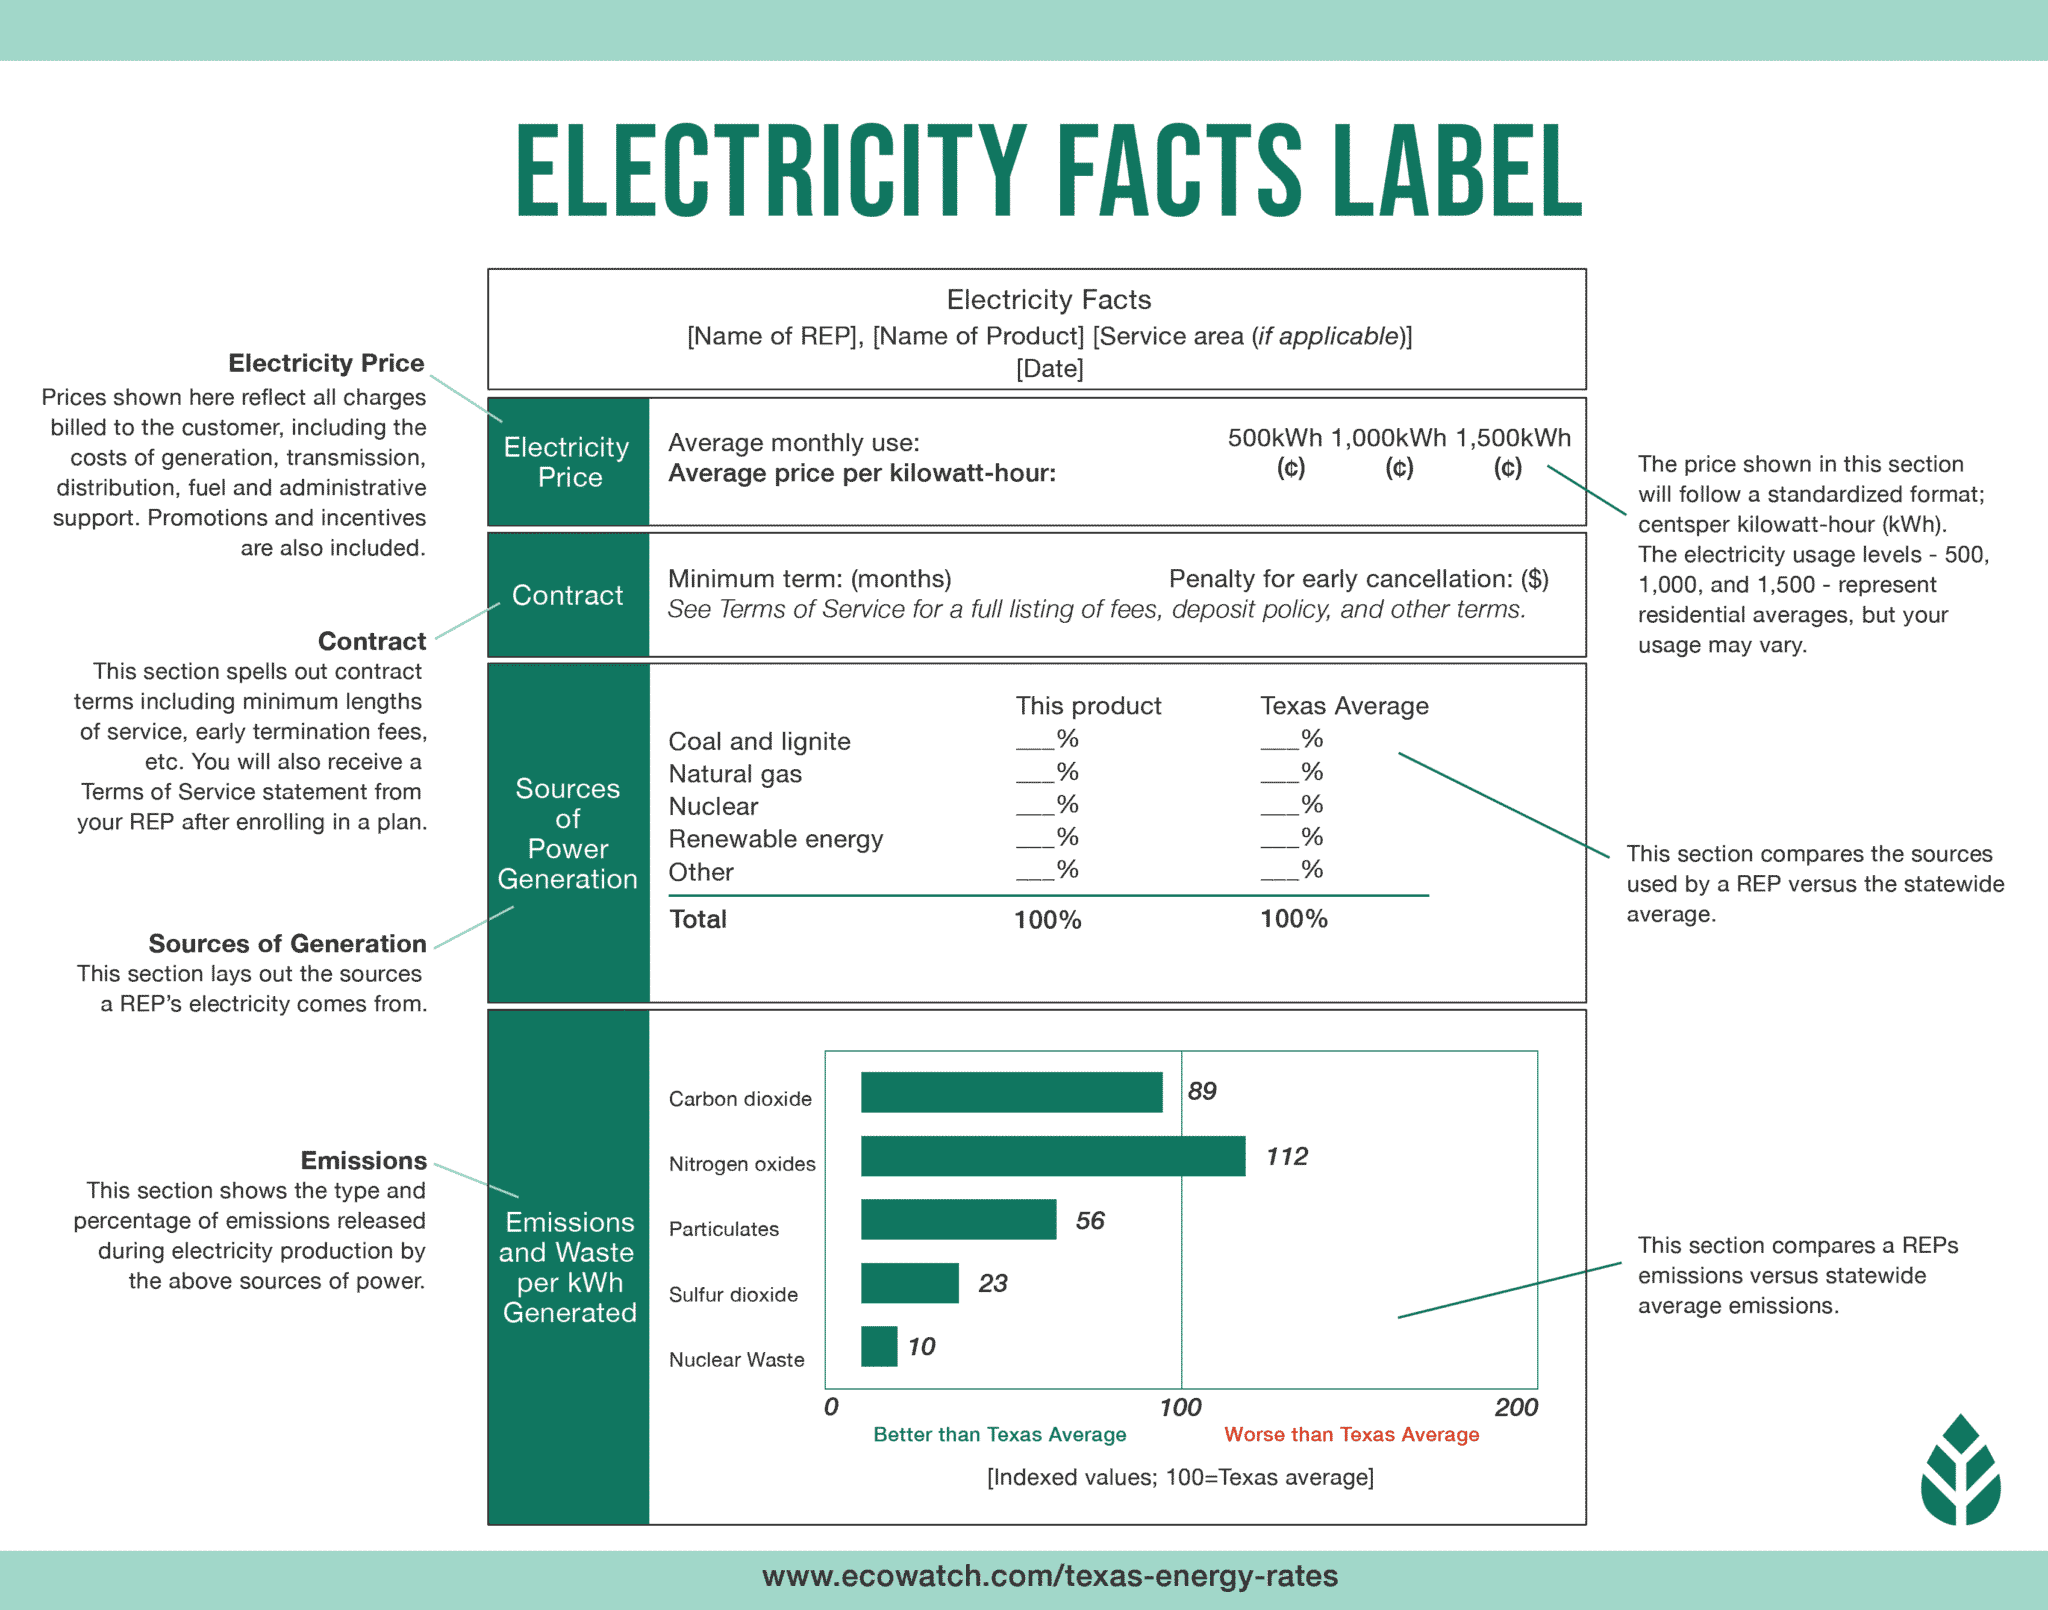 Electricity Facts Label for Houston Homeowners